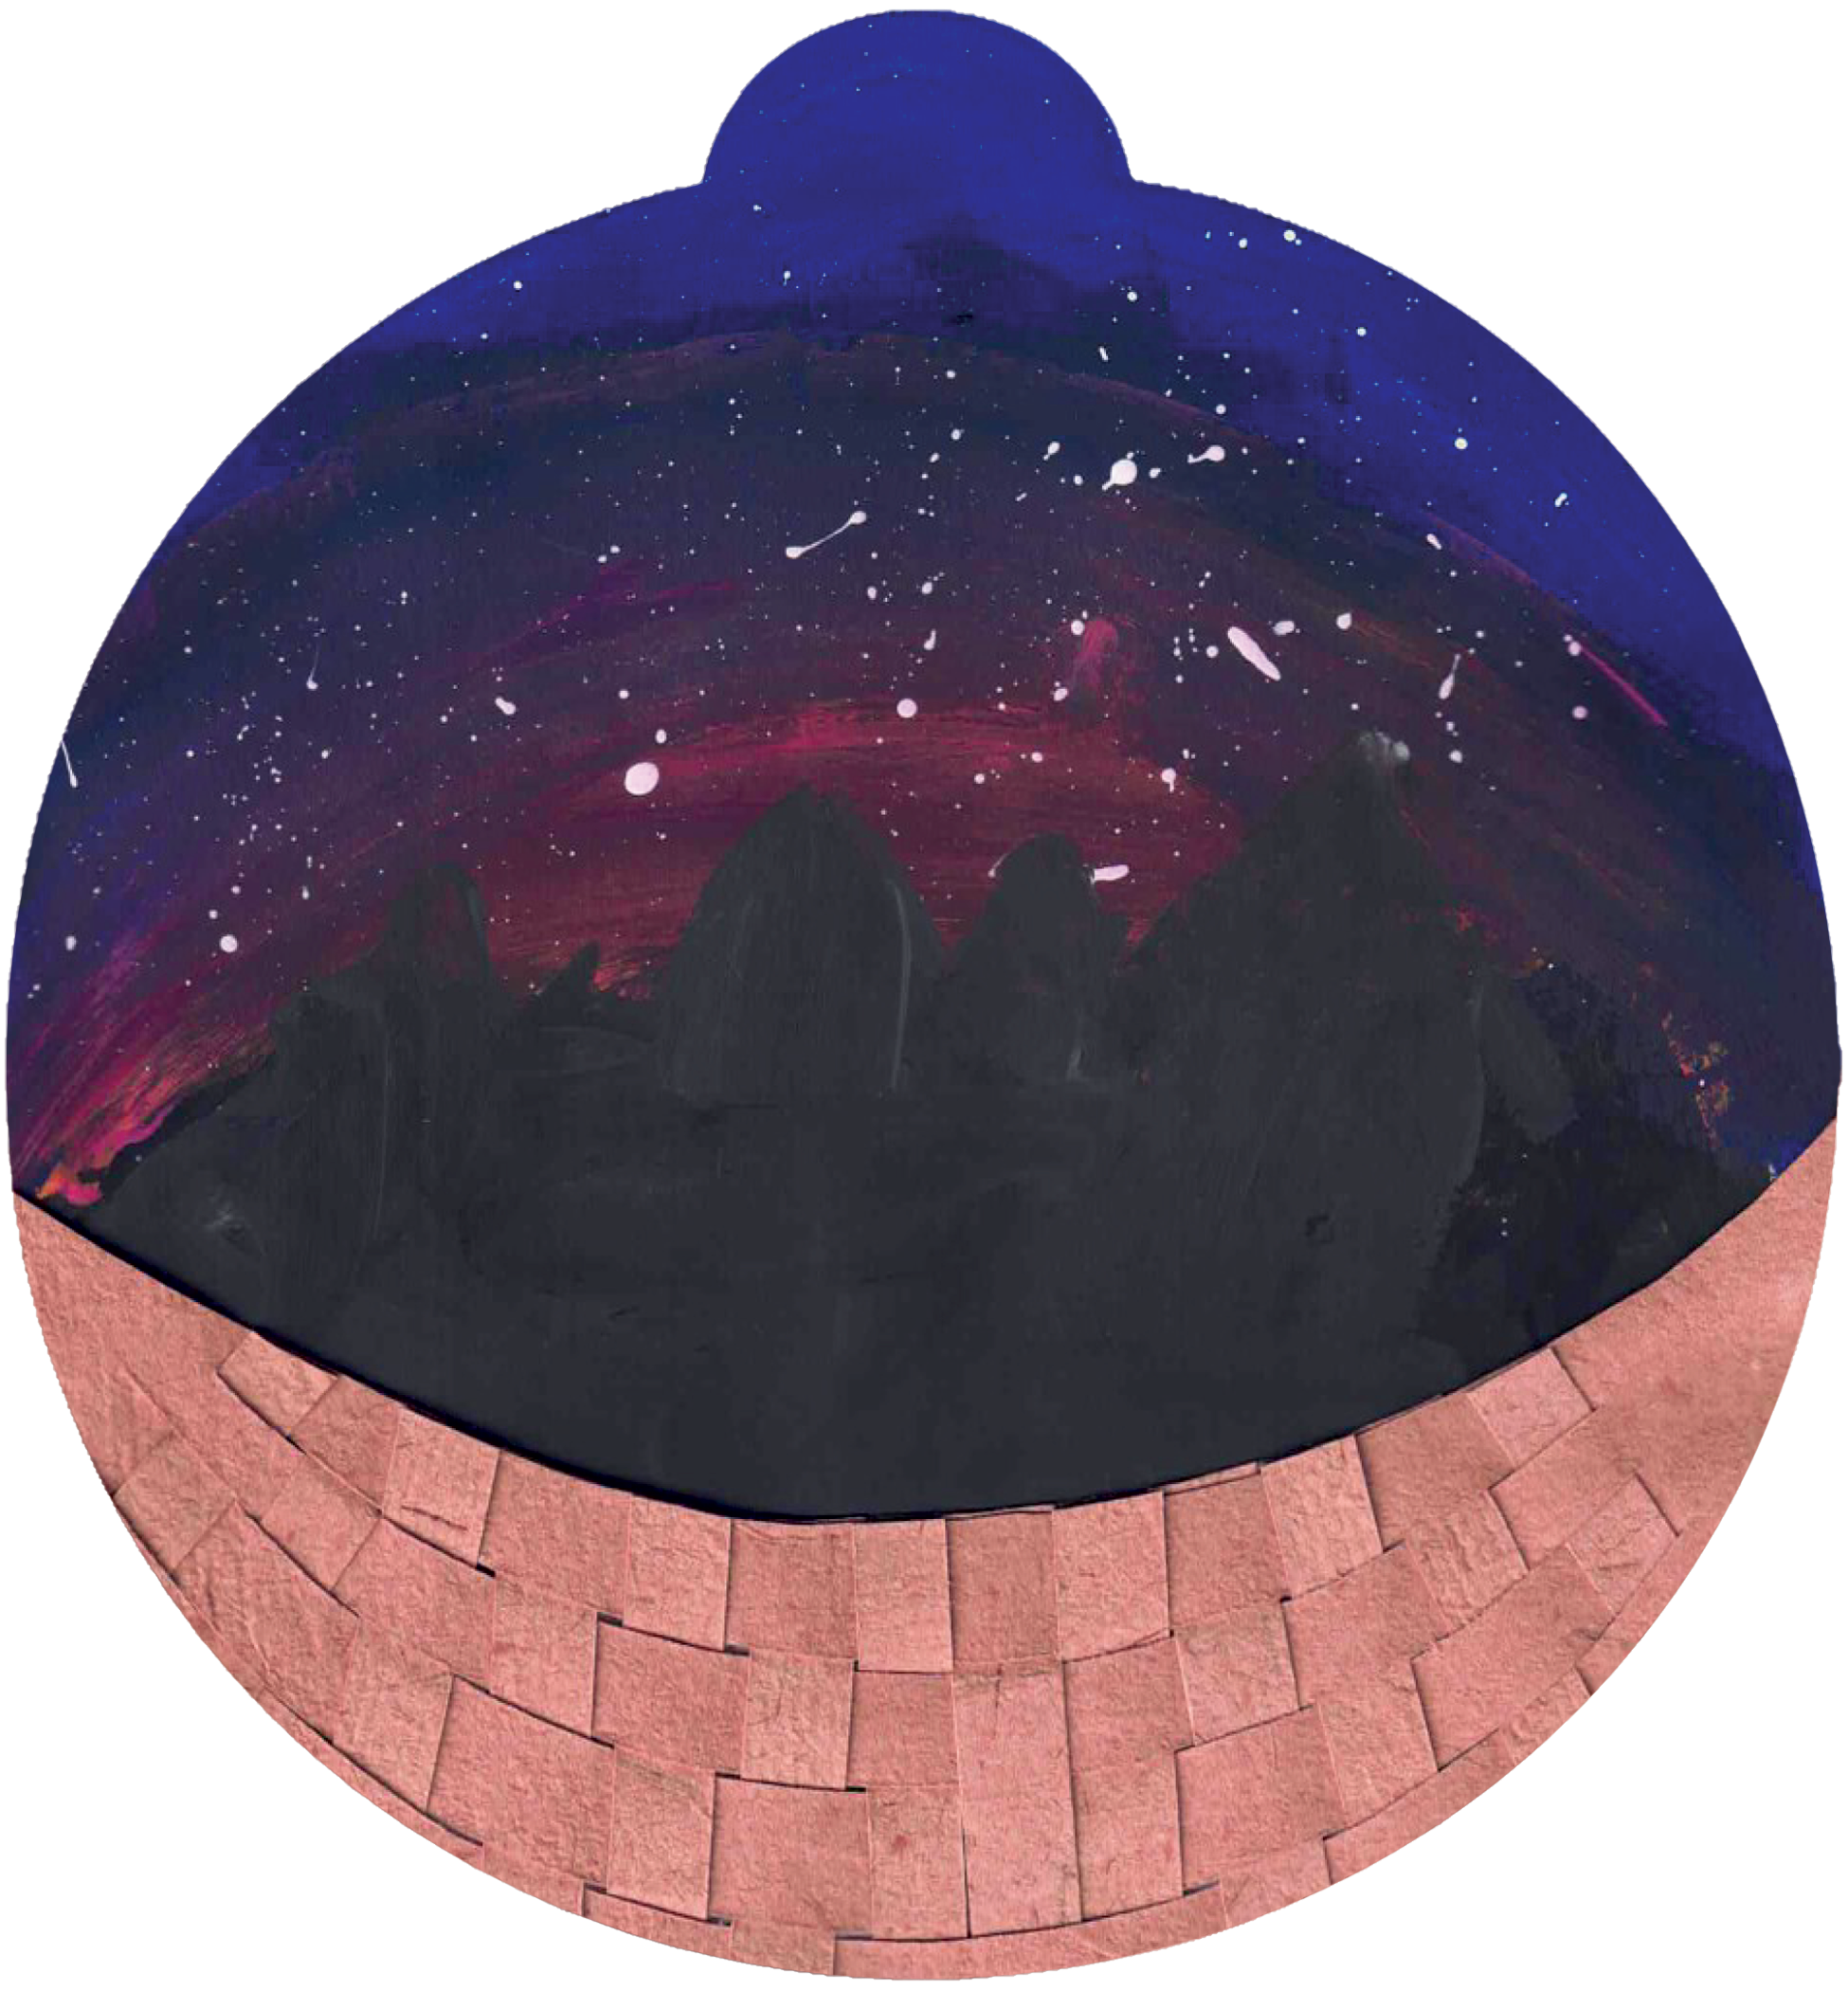 ornament depicting a night sky against mountaintops; at the bottom of the ornament is a woven basket